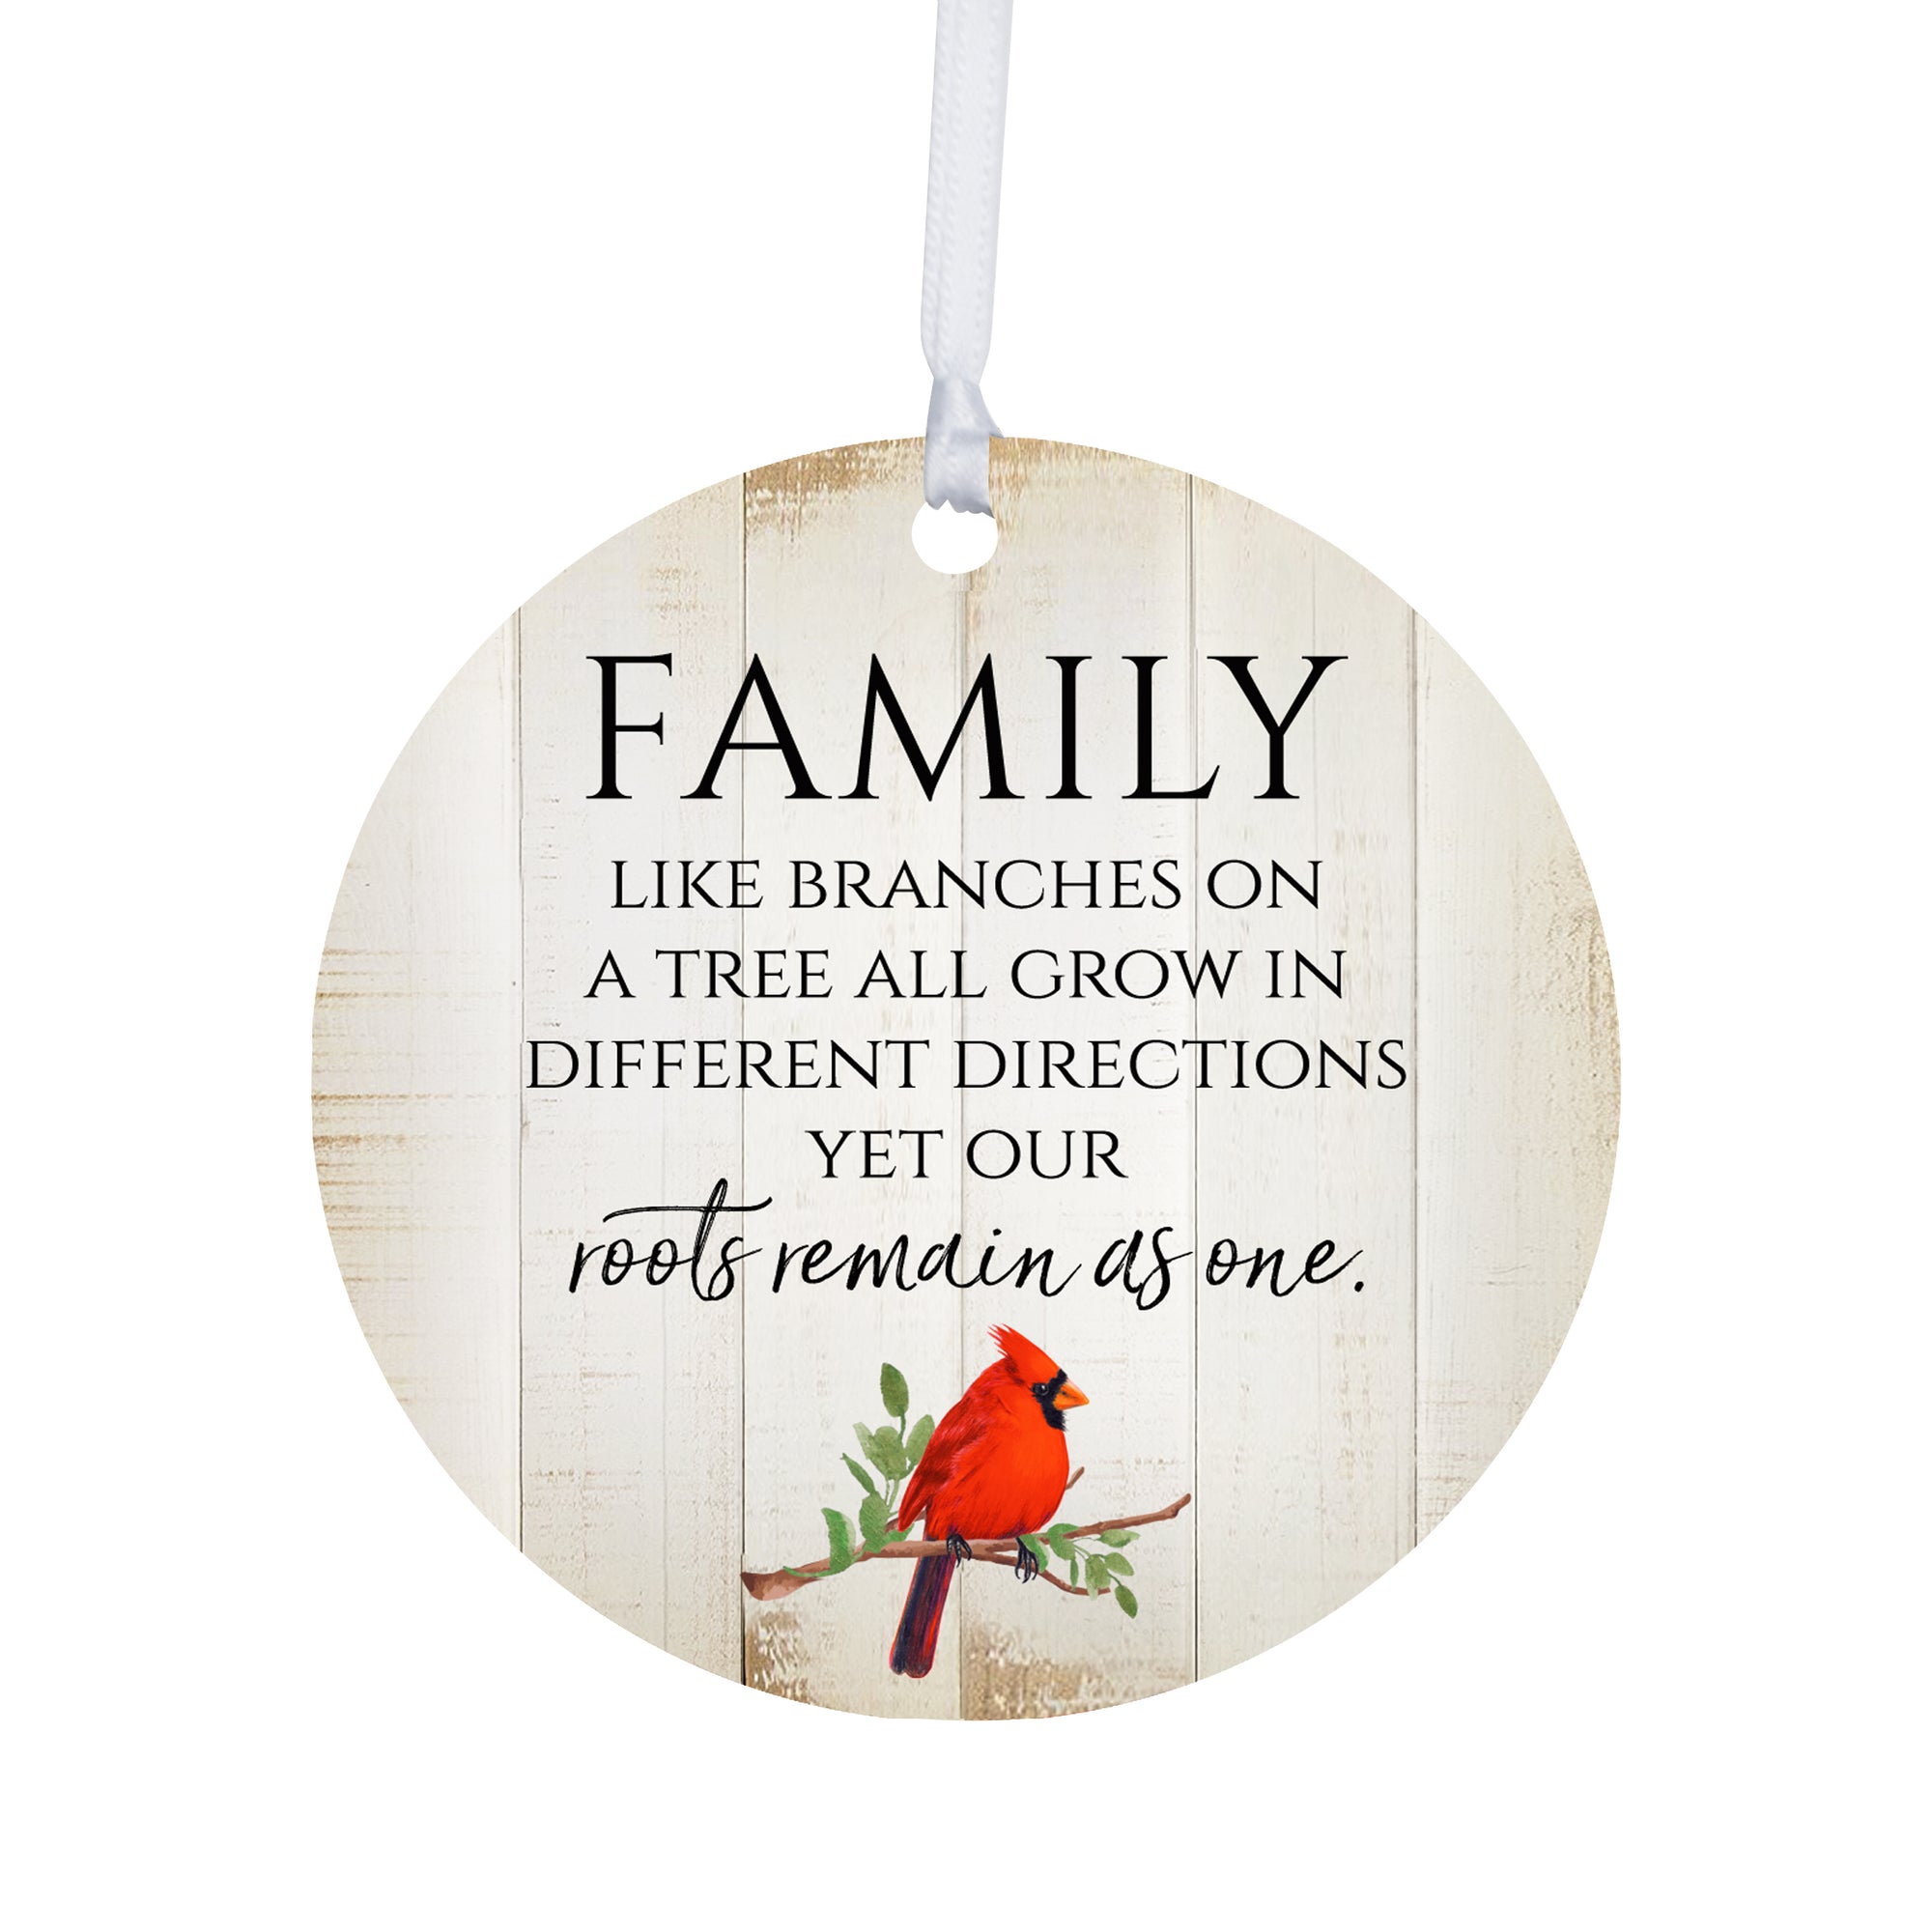 Vintage-Inspired Cardinal Ornament With Everyday Verses Gift Ideas - Family Like